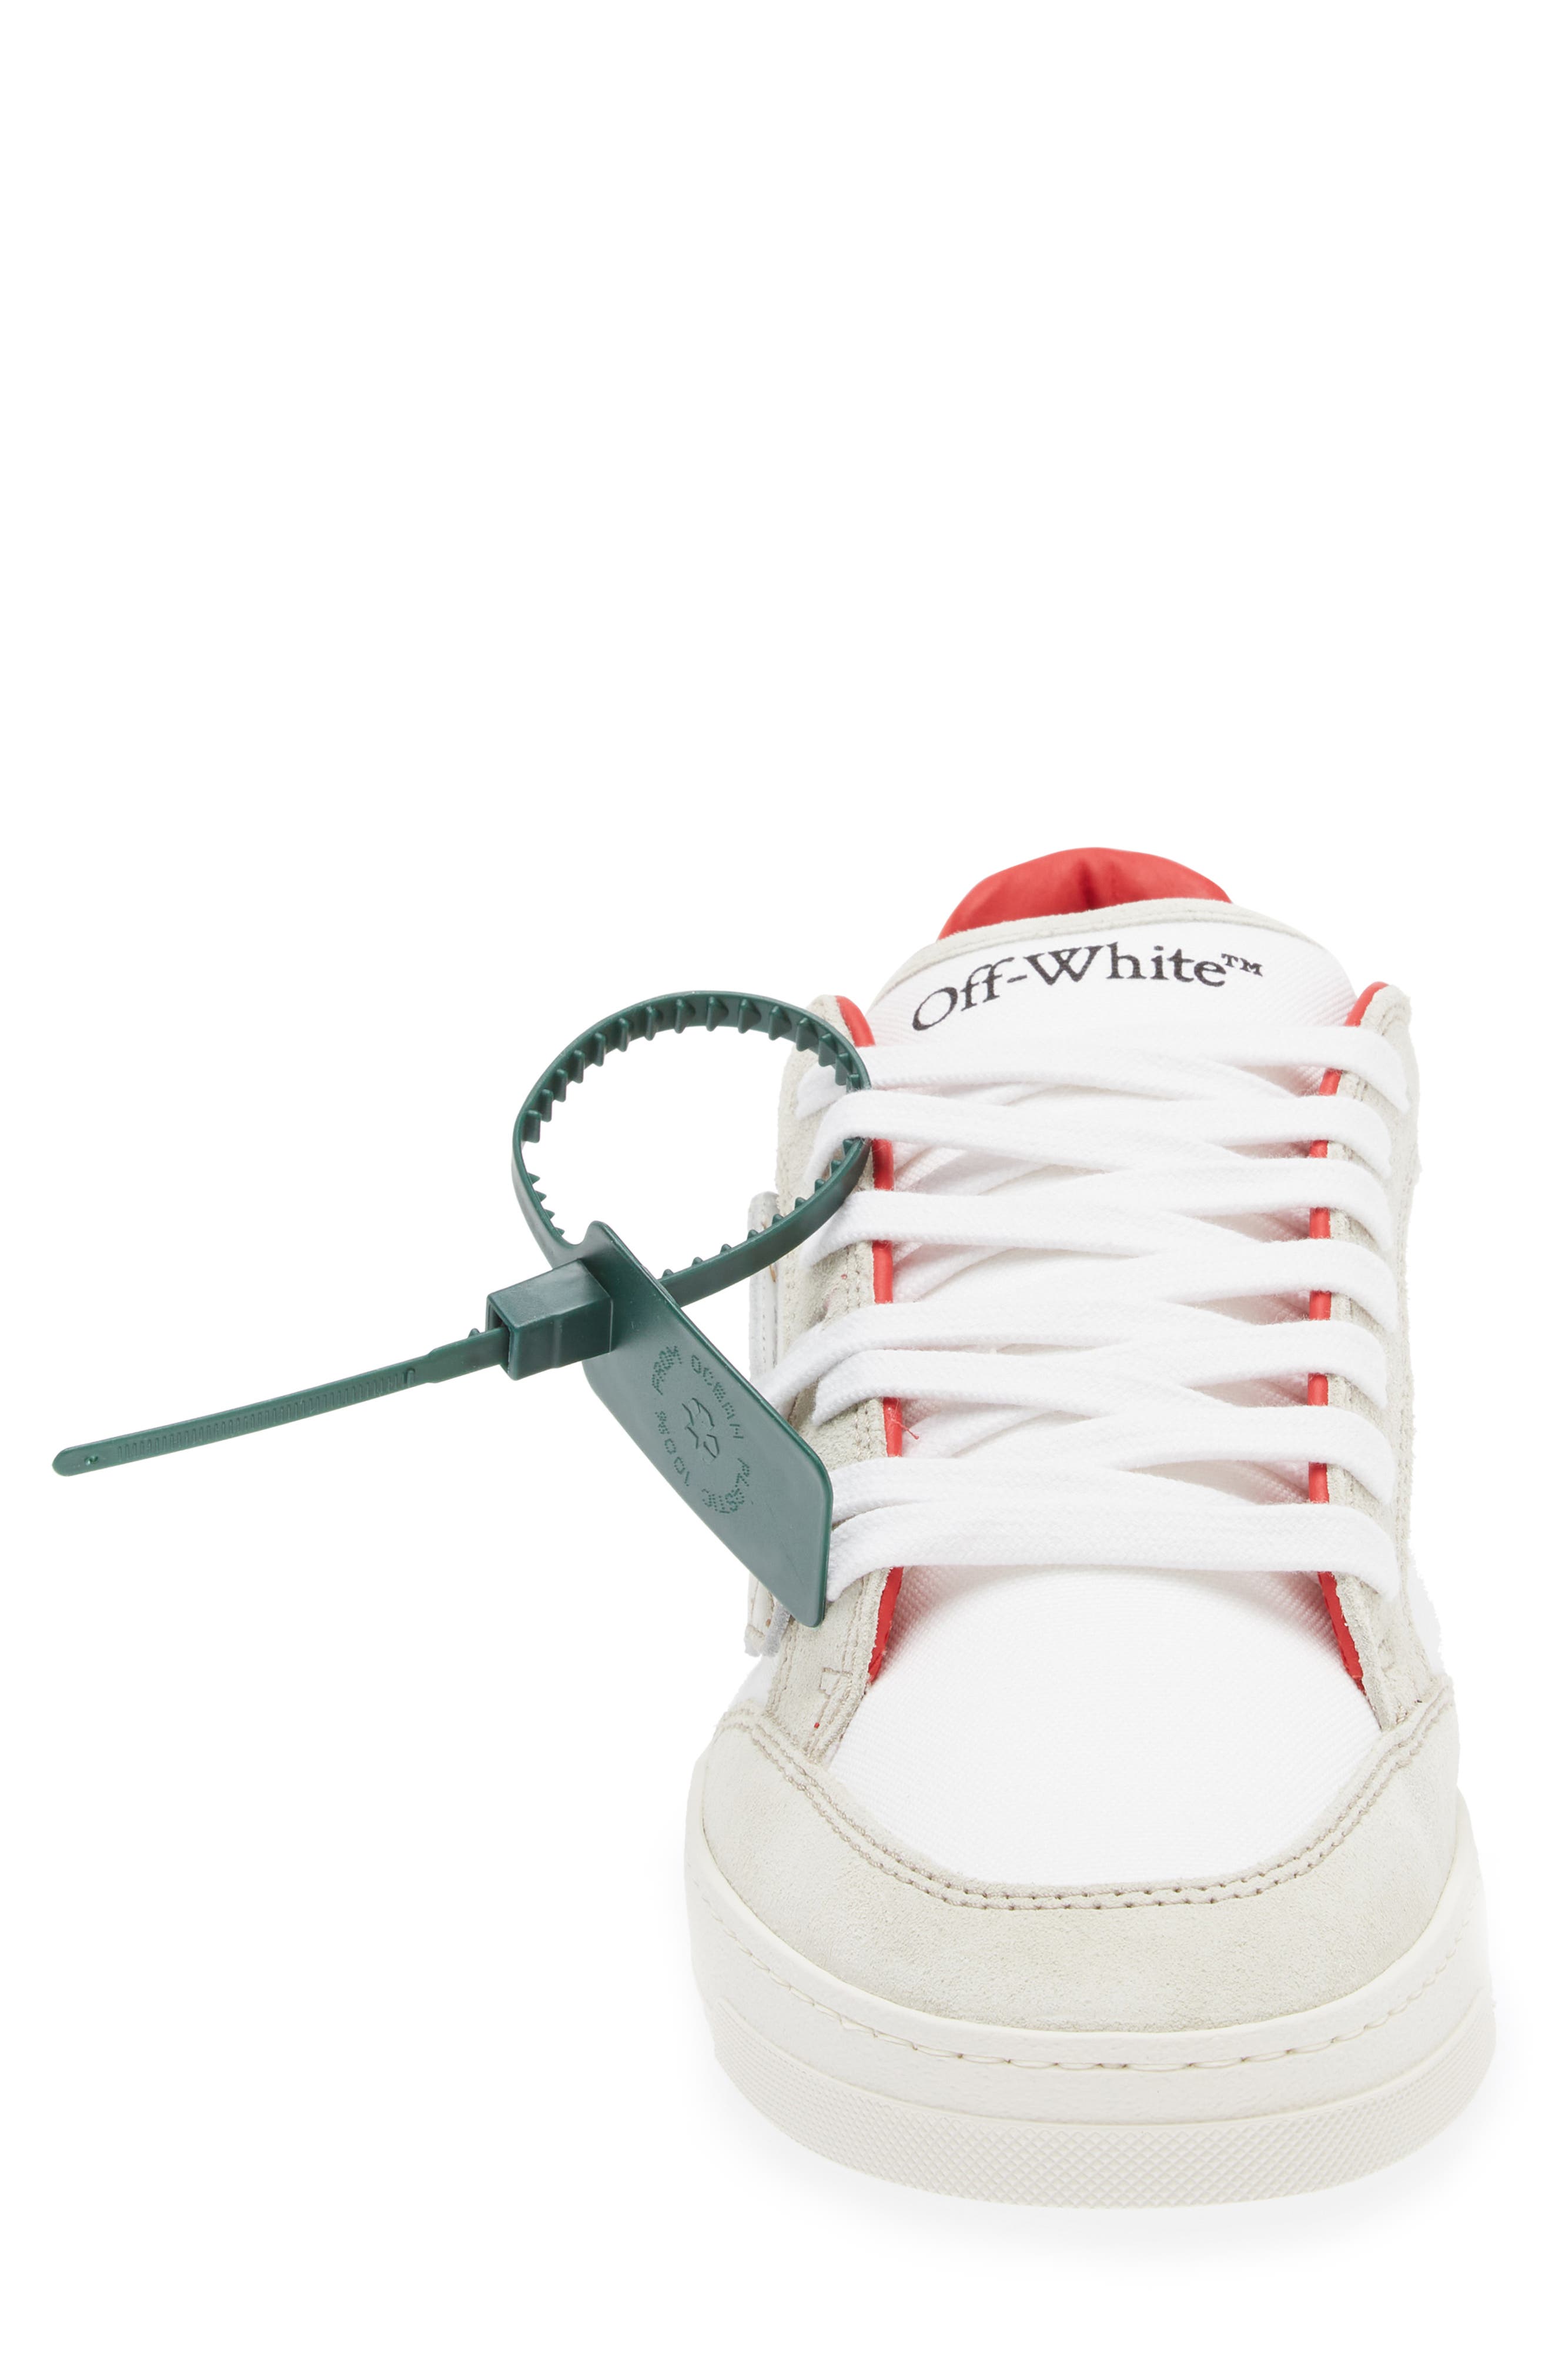 OFF-WHITE 5.0 low-top sneakers